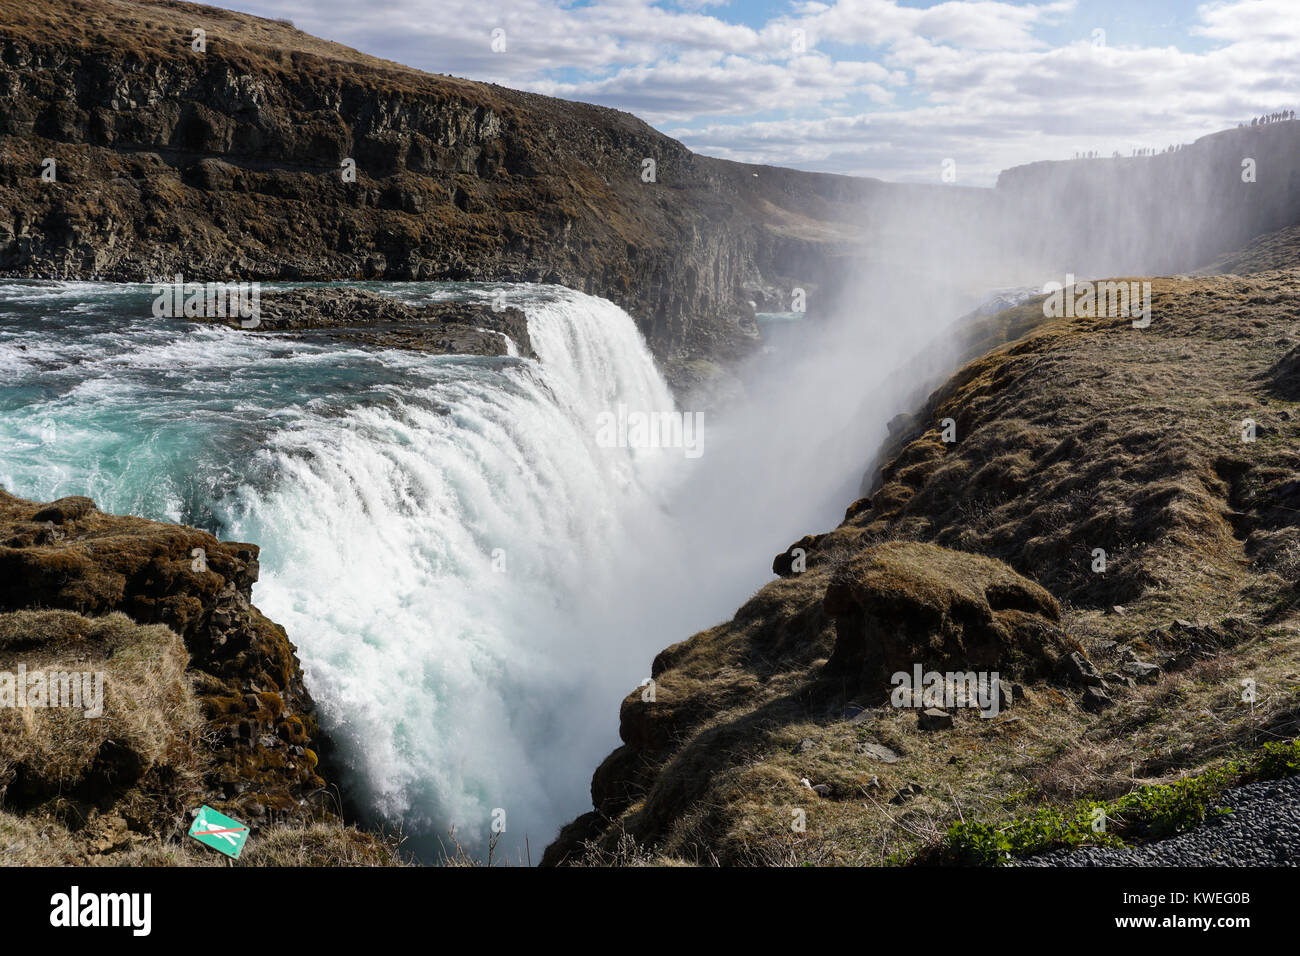 Gulfoss waterfall located in the canyon of the Olfusa River in southwestern Iceland. Stock Photo